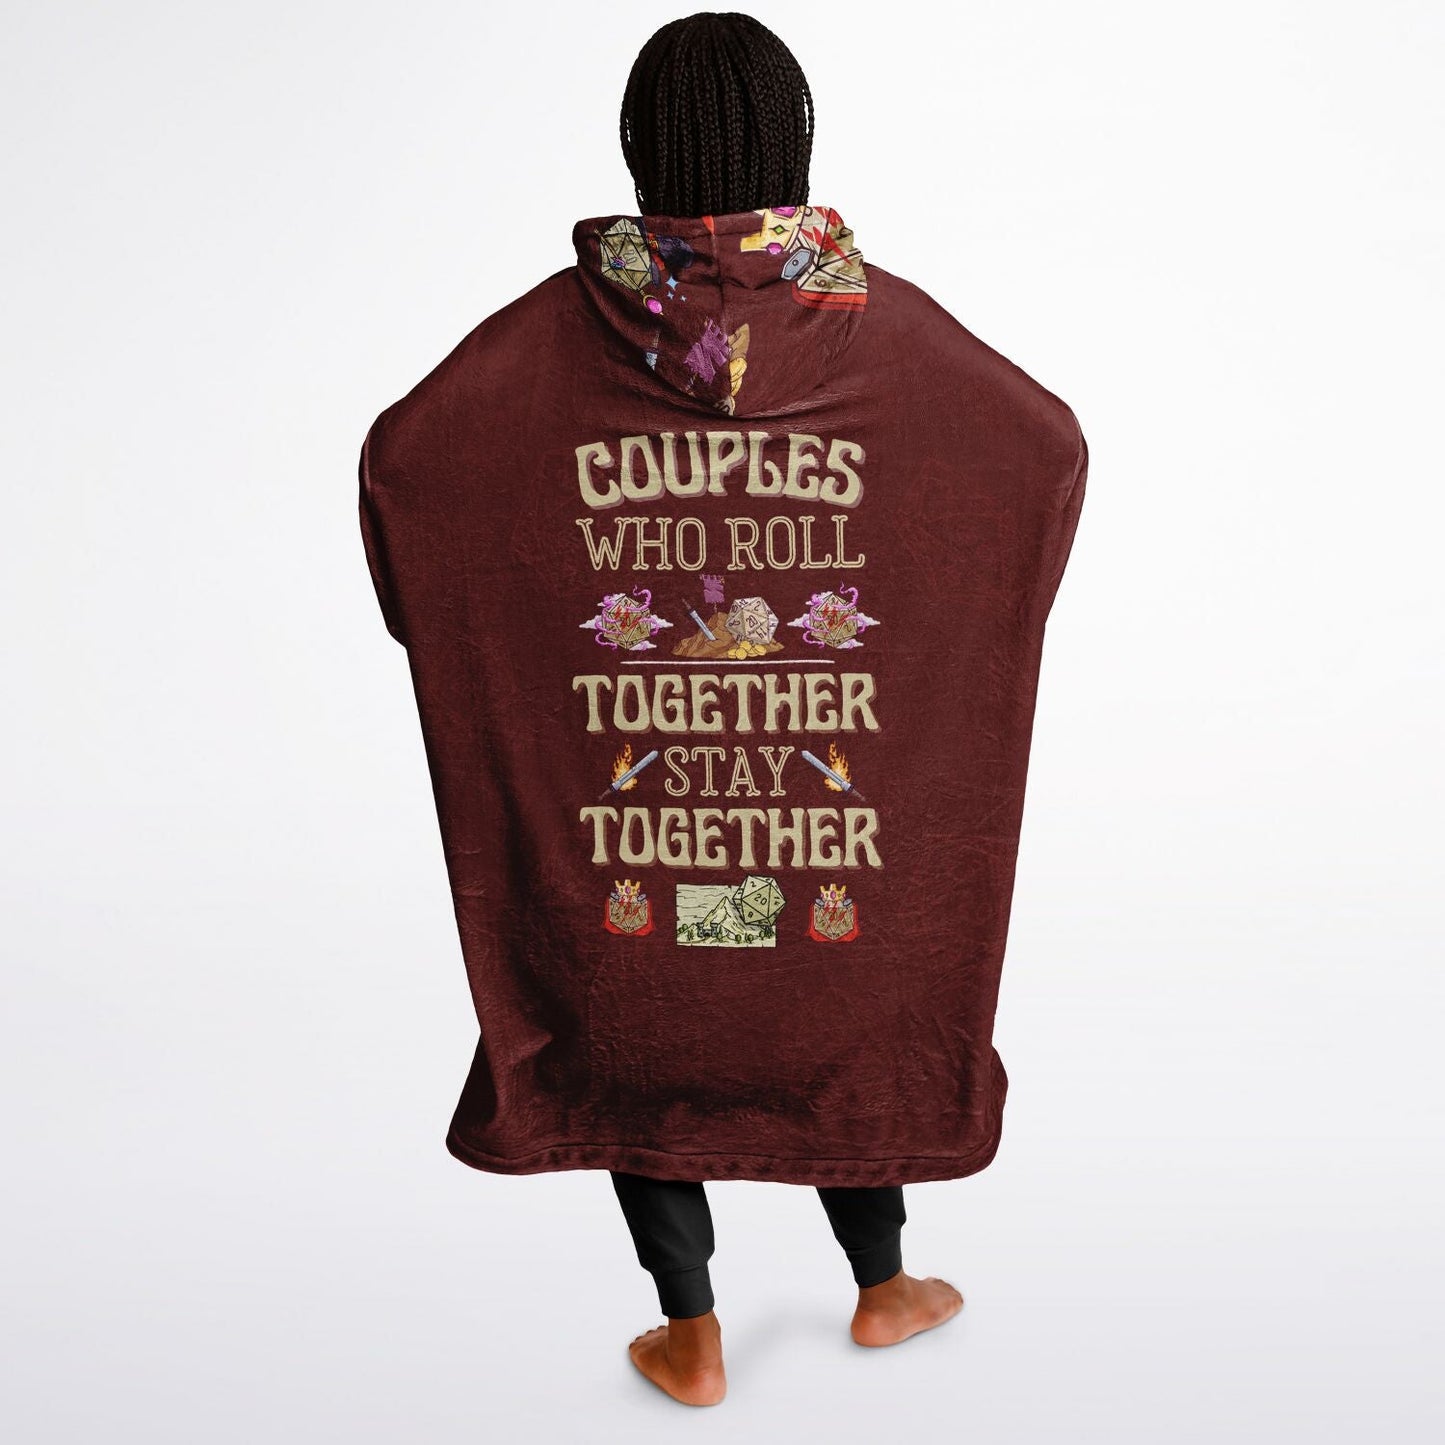 Couples Who Roll Together Stay Together - All Over Print Super Hoodie - chaosandthunder